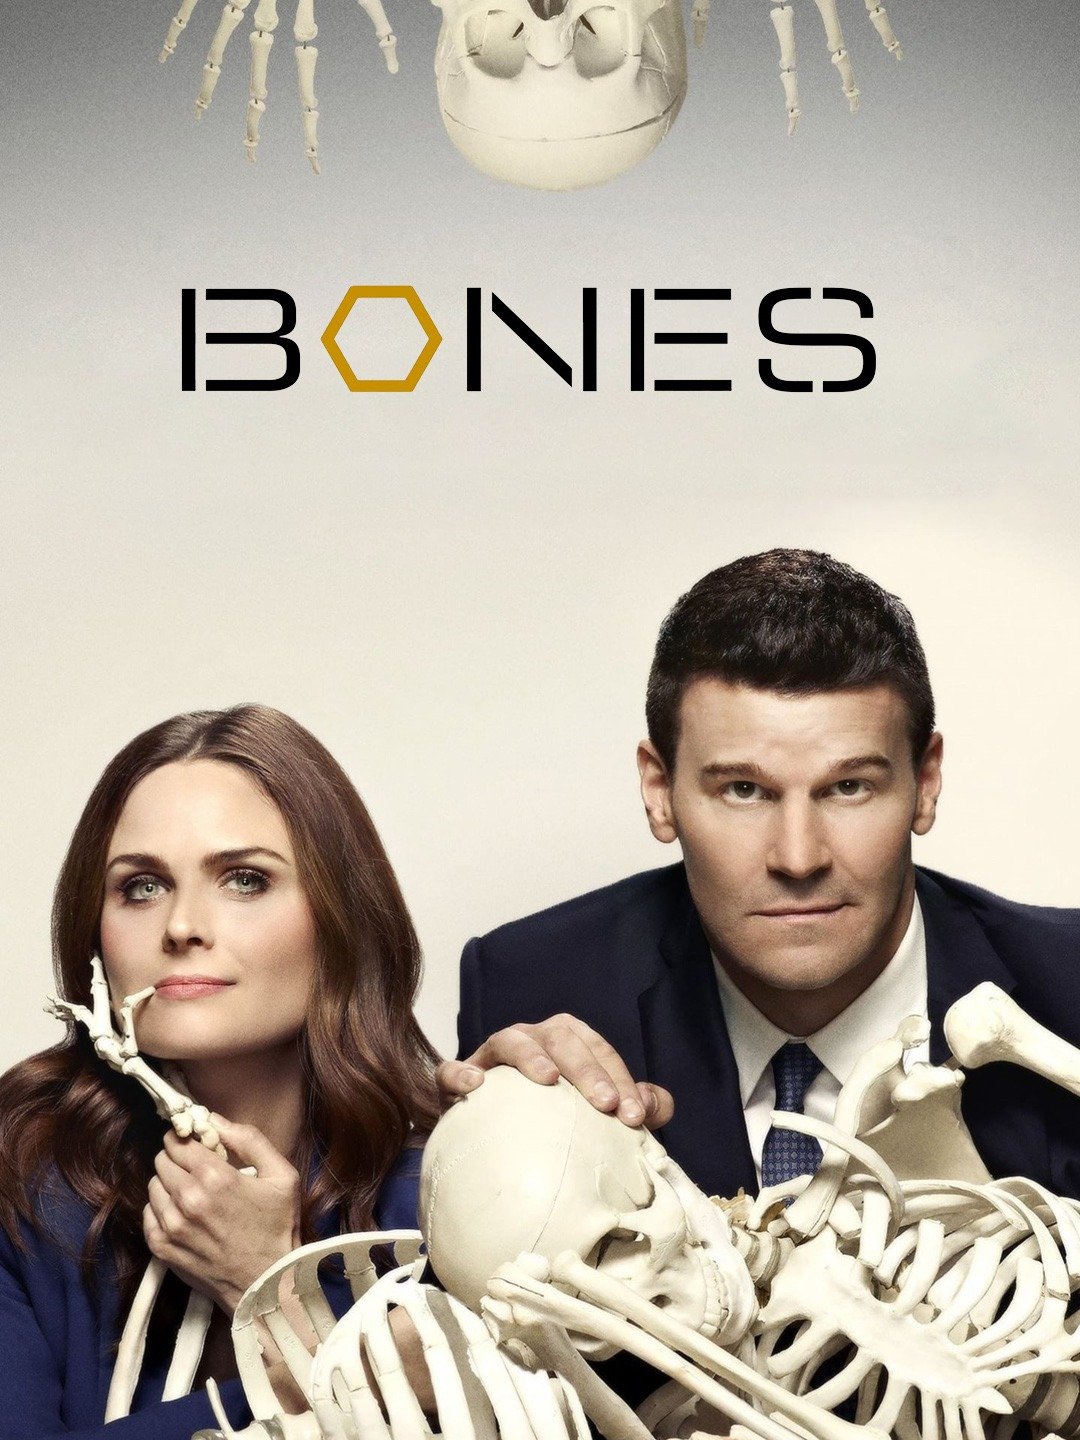 who does michelle end up with in bones